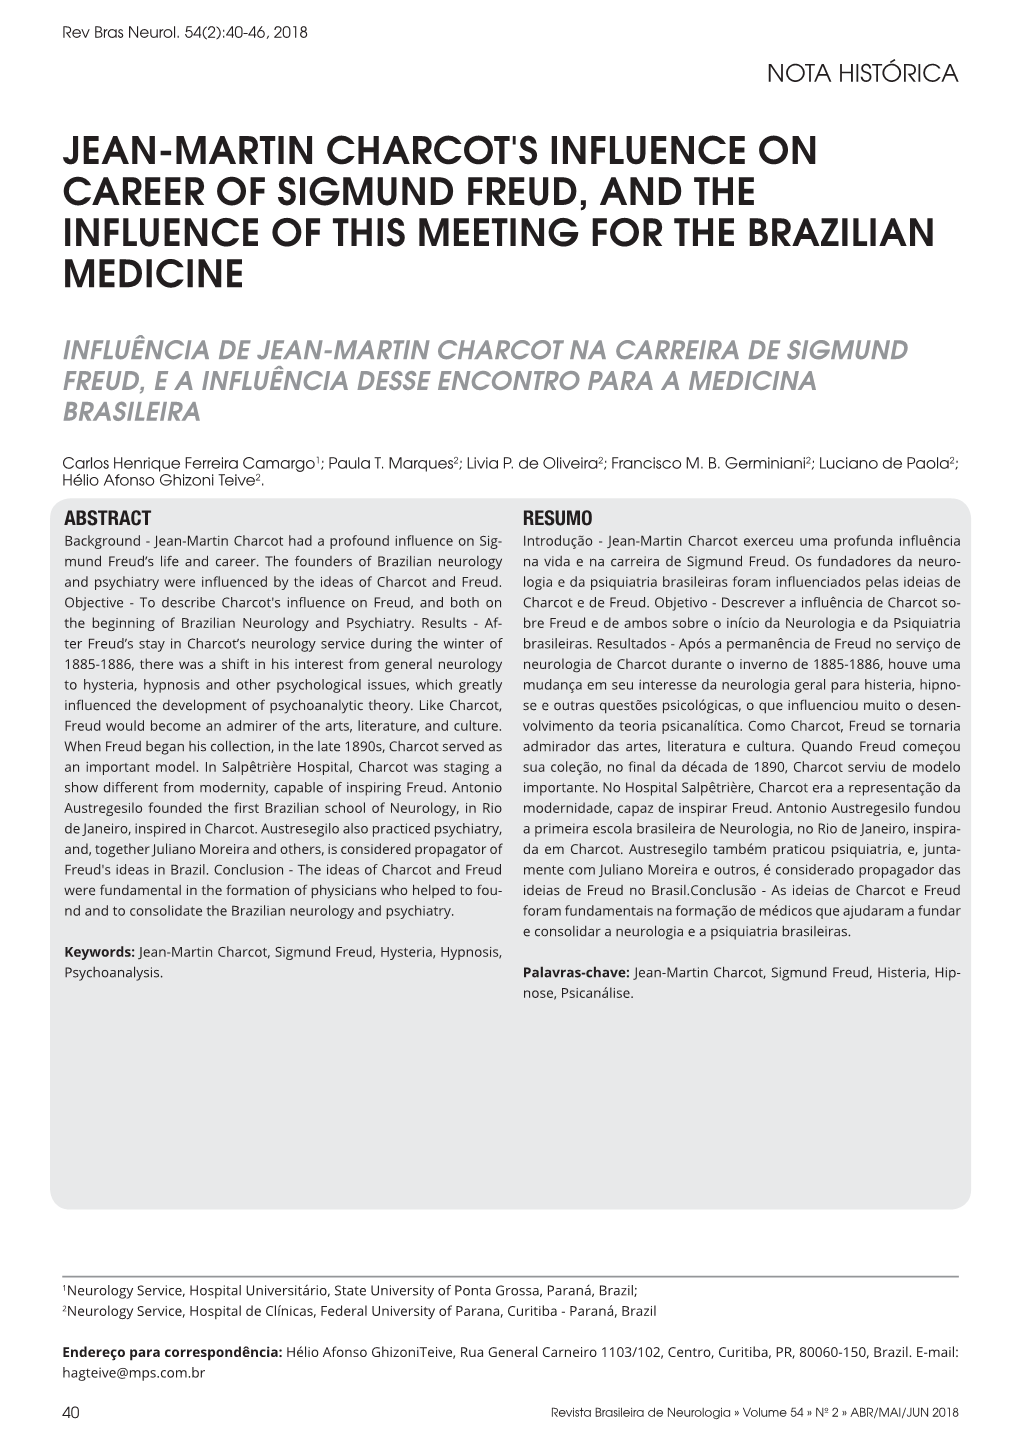 Jean-Martin Charcot's Influence on Career of Sigmund Freud, and the Influence of This Meeting for the Brazilian Medicine